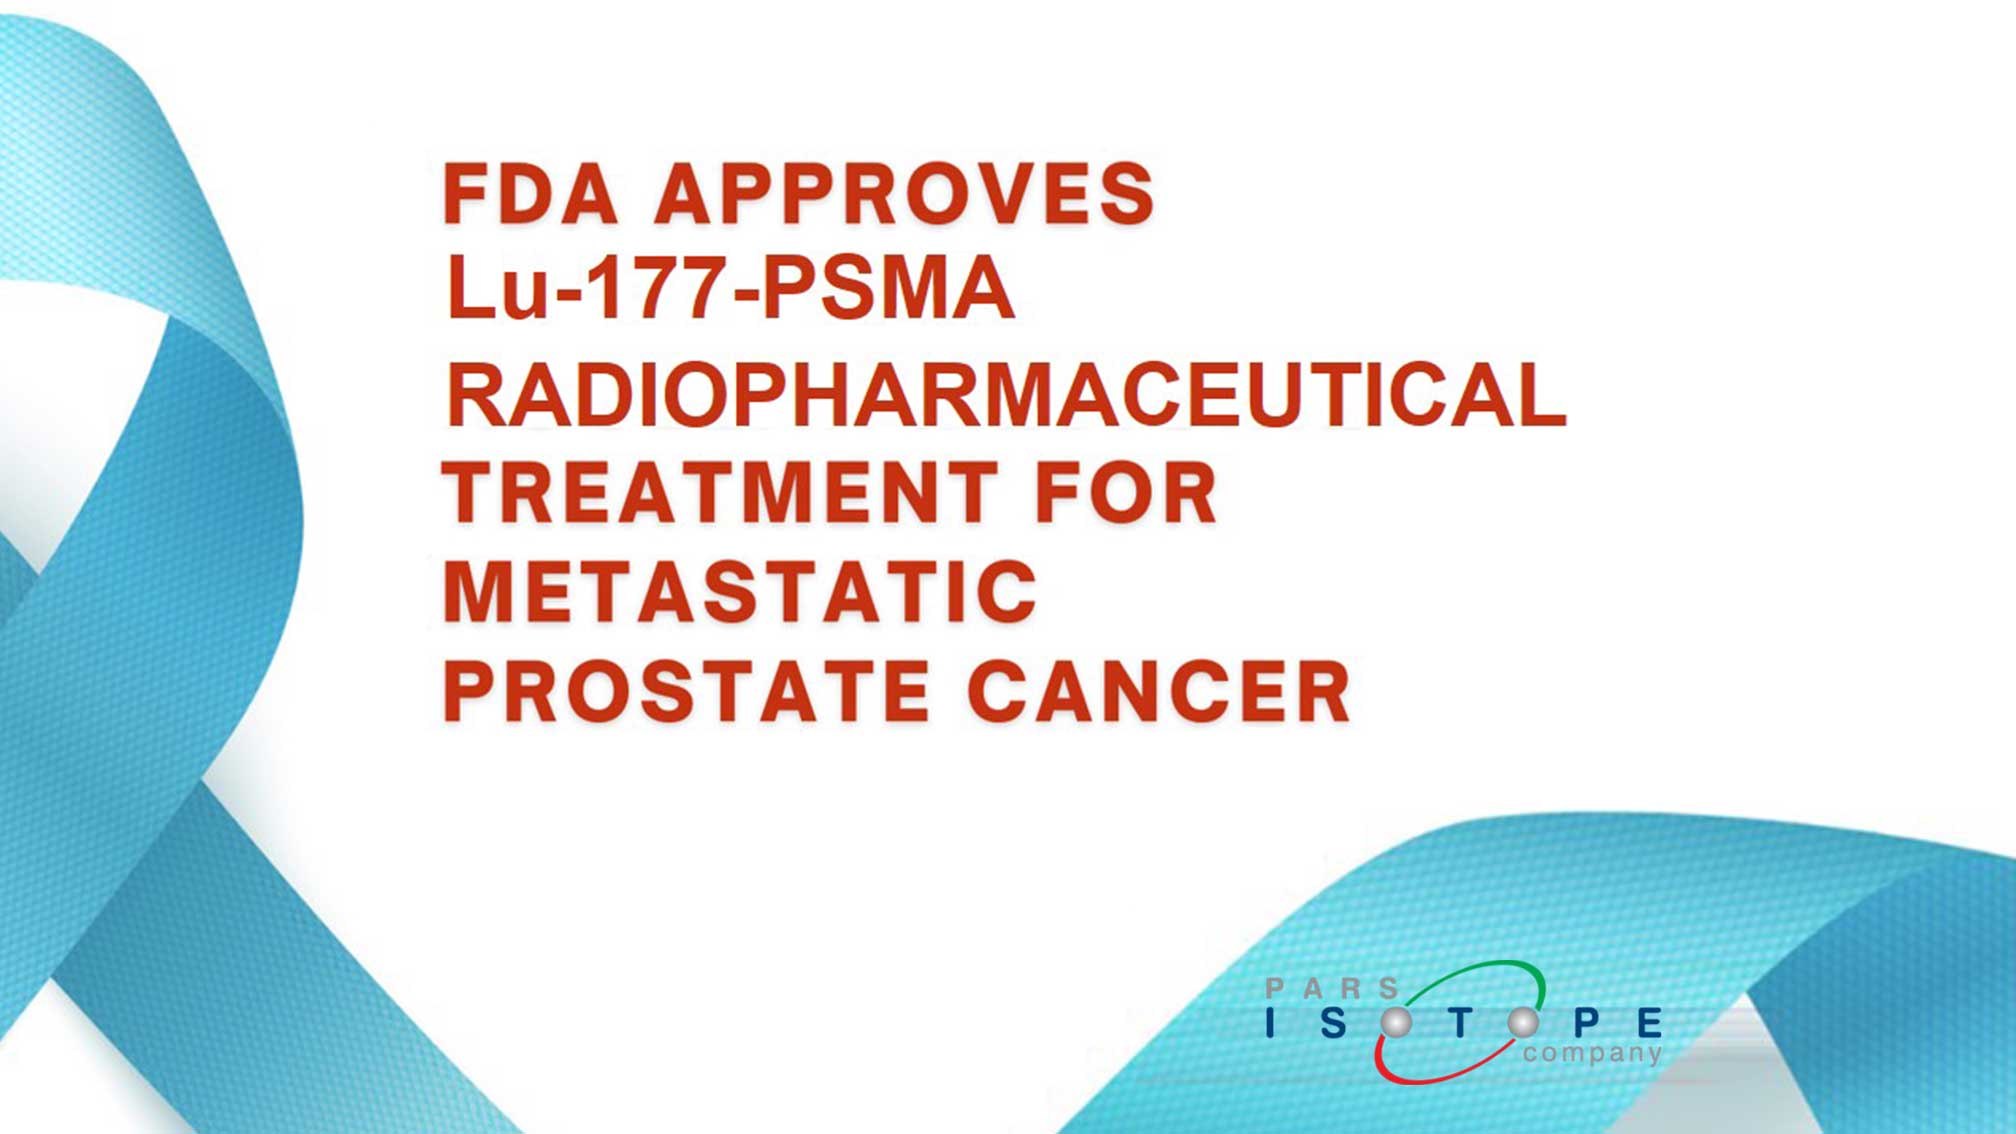 The US Food and Drug Administration (FDA) Approves the Lu-177-PSMA Radiopharmaceutical